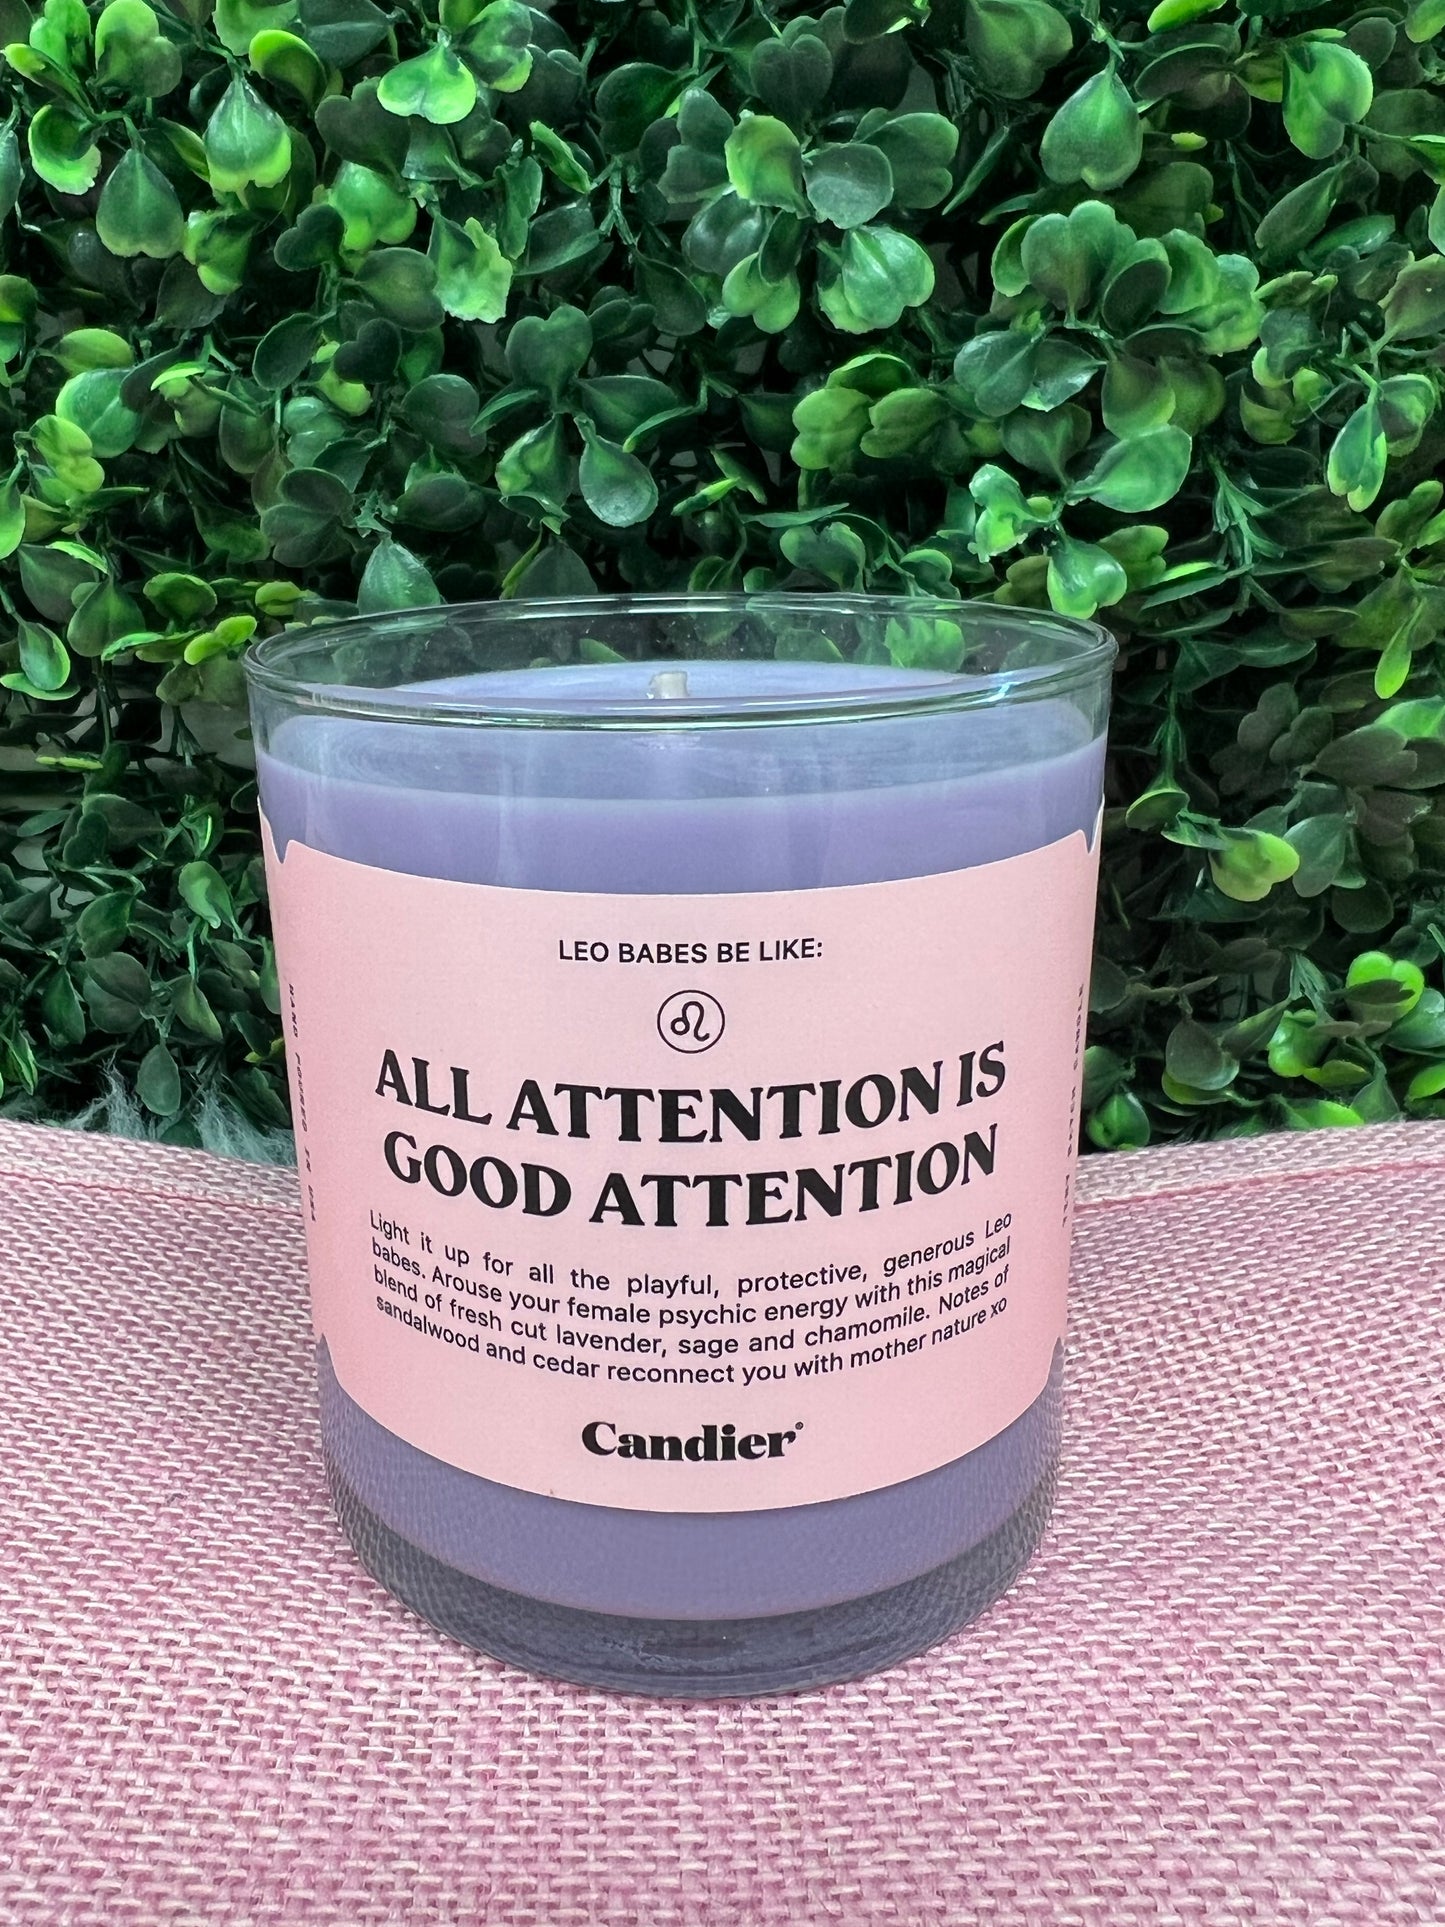 Candles - Ryan Porter Horoscope Leo Babes Be Like: All Attention Is Good Attention Candle